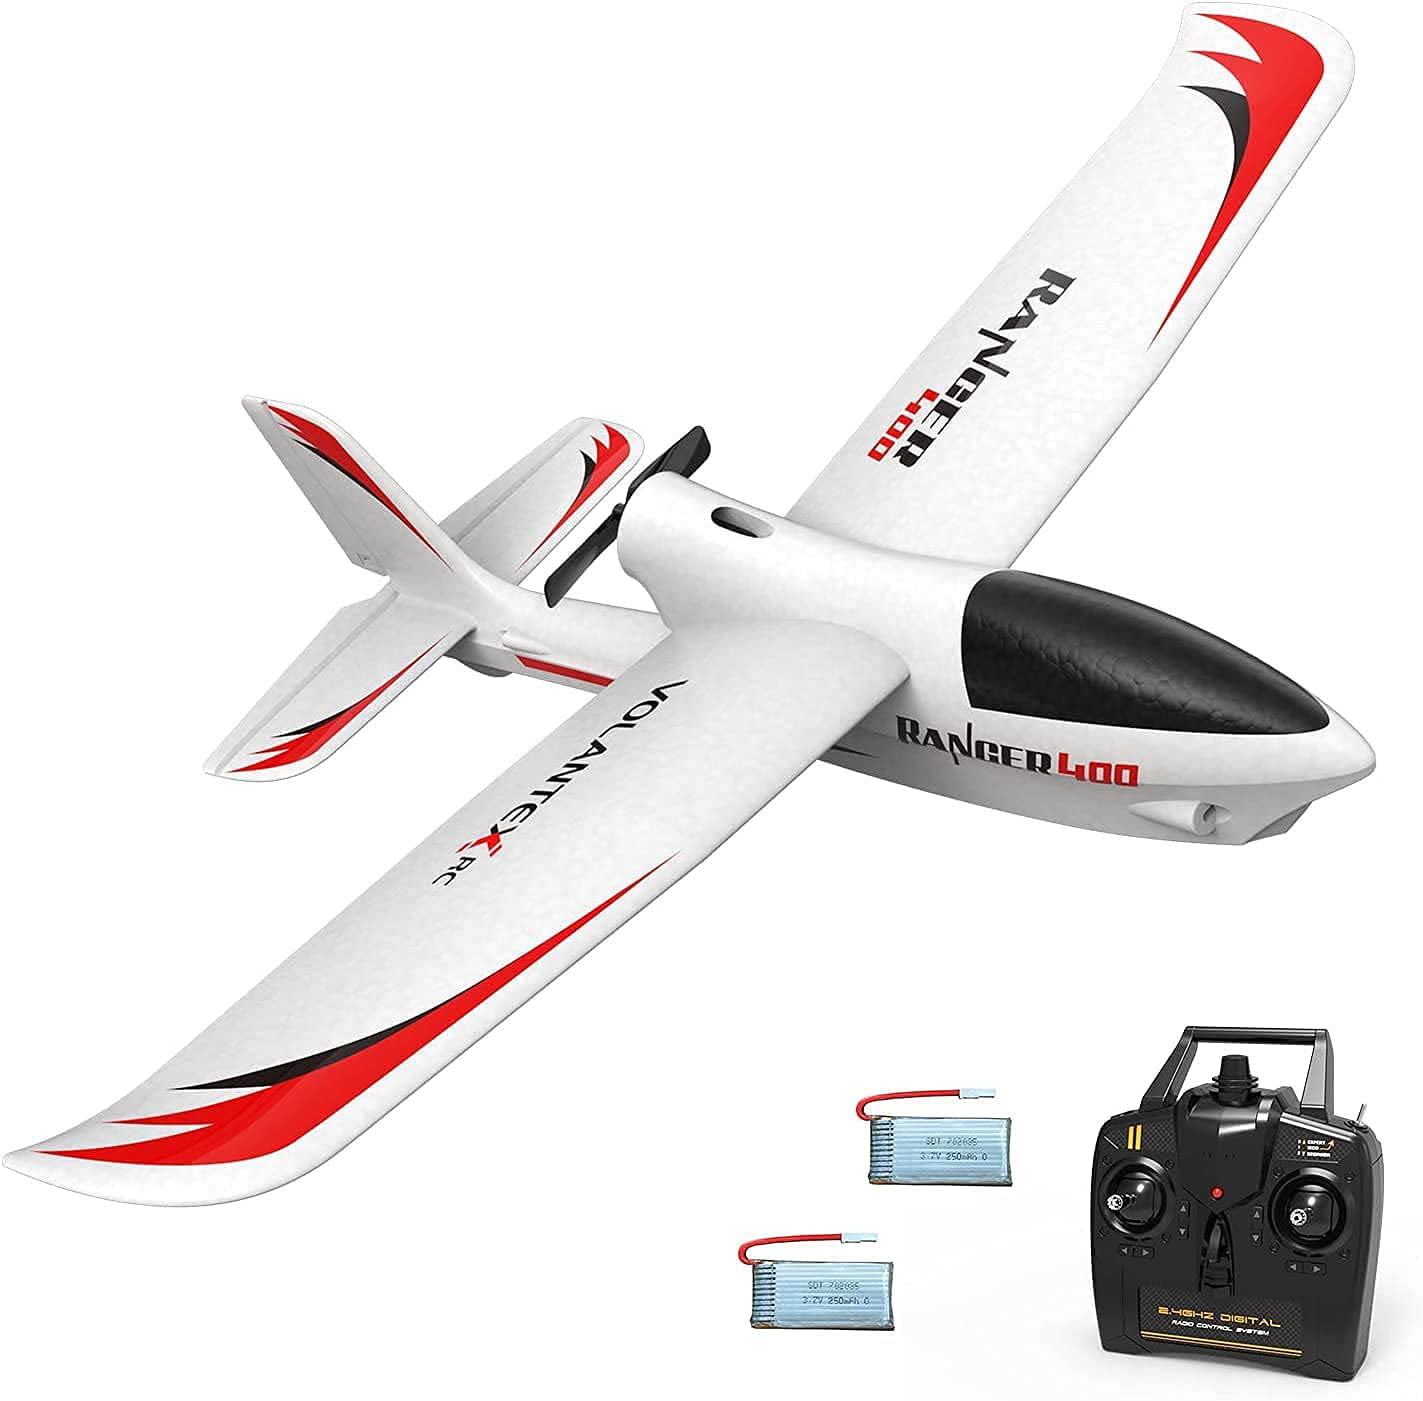 One-Key U-Turn Function Easy to Fly for Beginners VOLANTEXRC RC Airplane RTF Ranger600 WiFi Parkflyer RC Aircraft Plane Ready to Fly with Xpilot Stabilization System 761-2 WiFi 